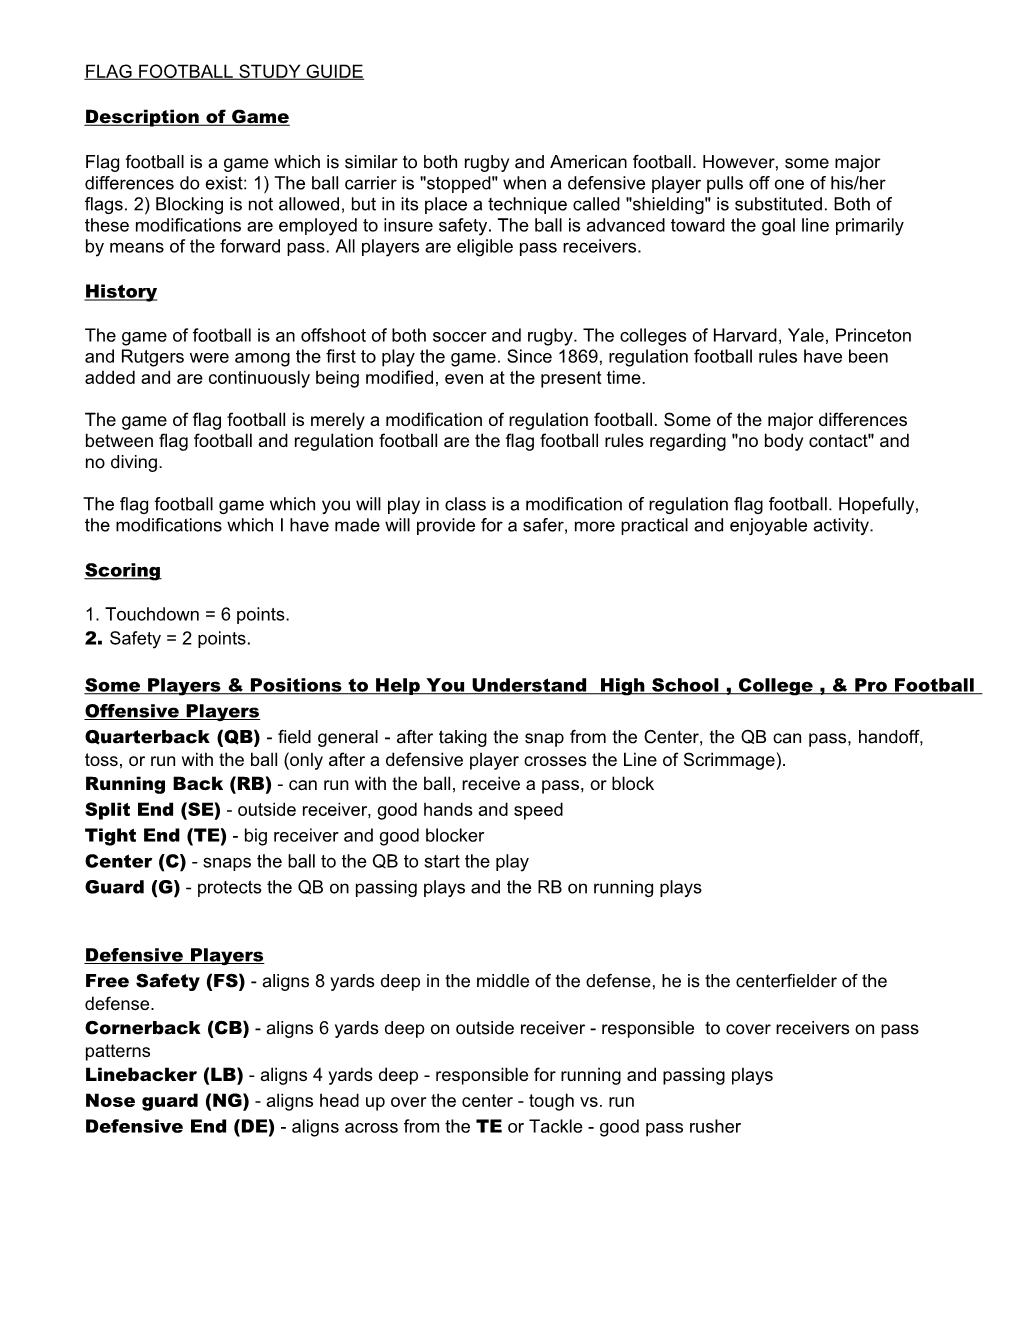 PHYSICAL EDUCATION Unit: Flag Football STUDY GUIDE